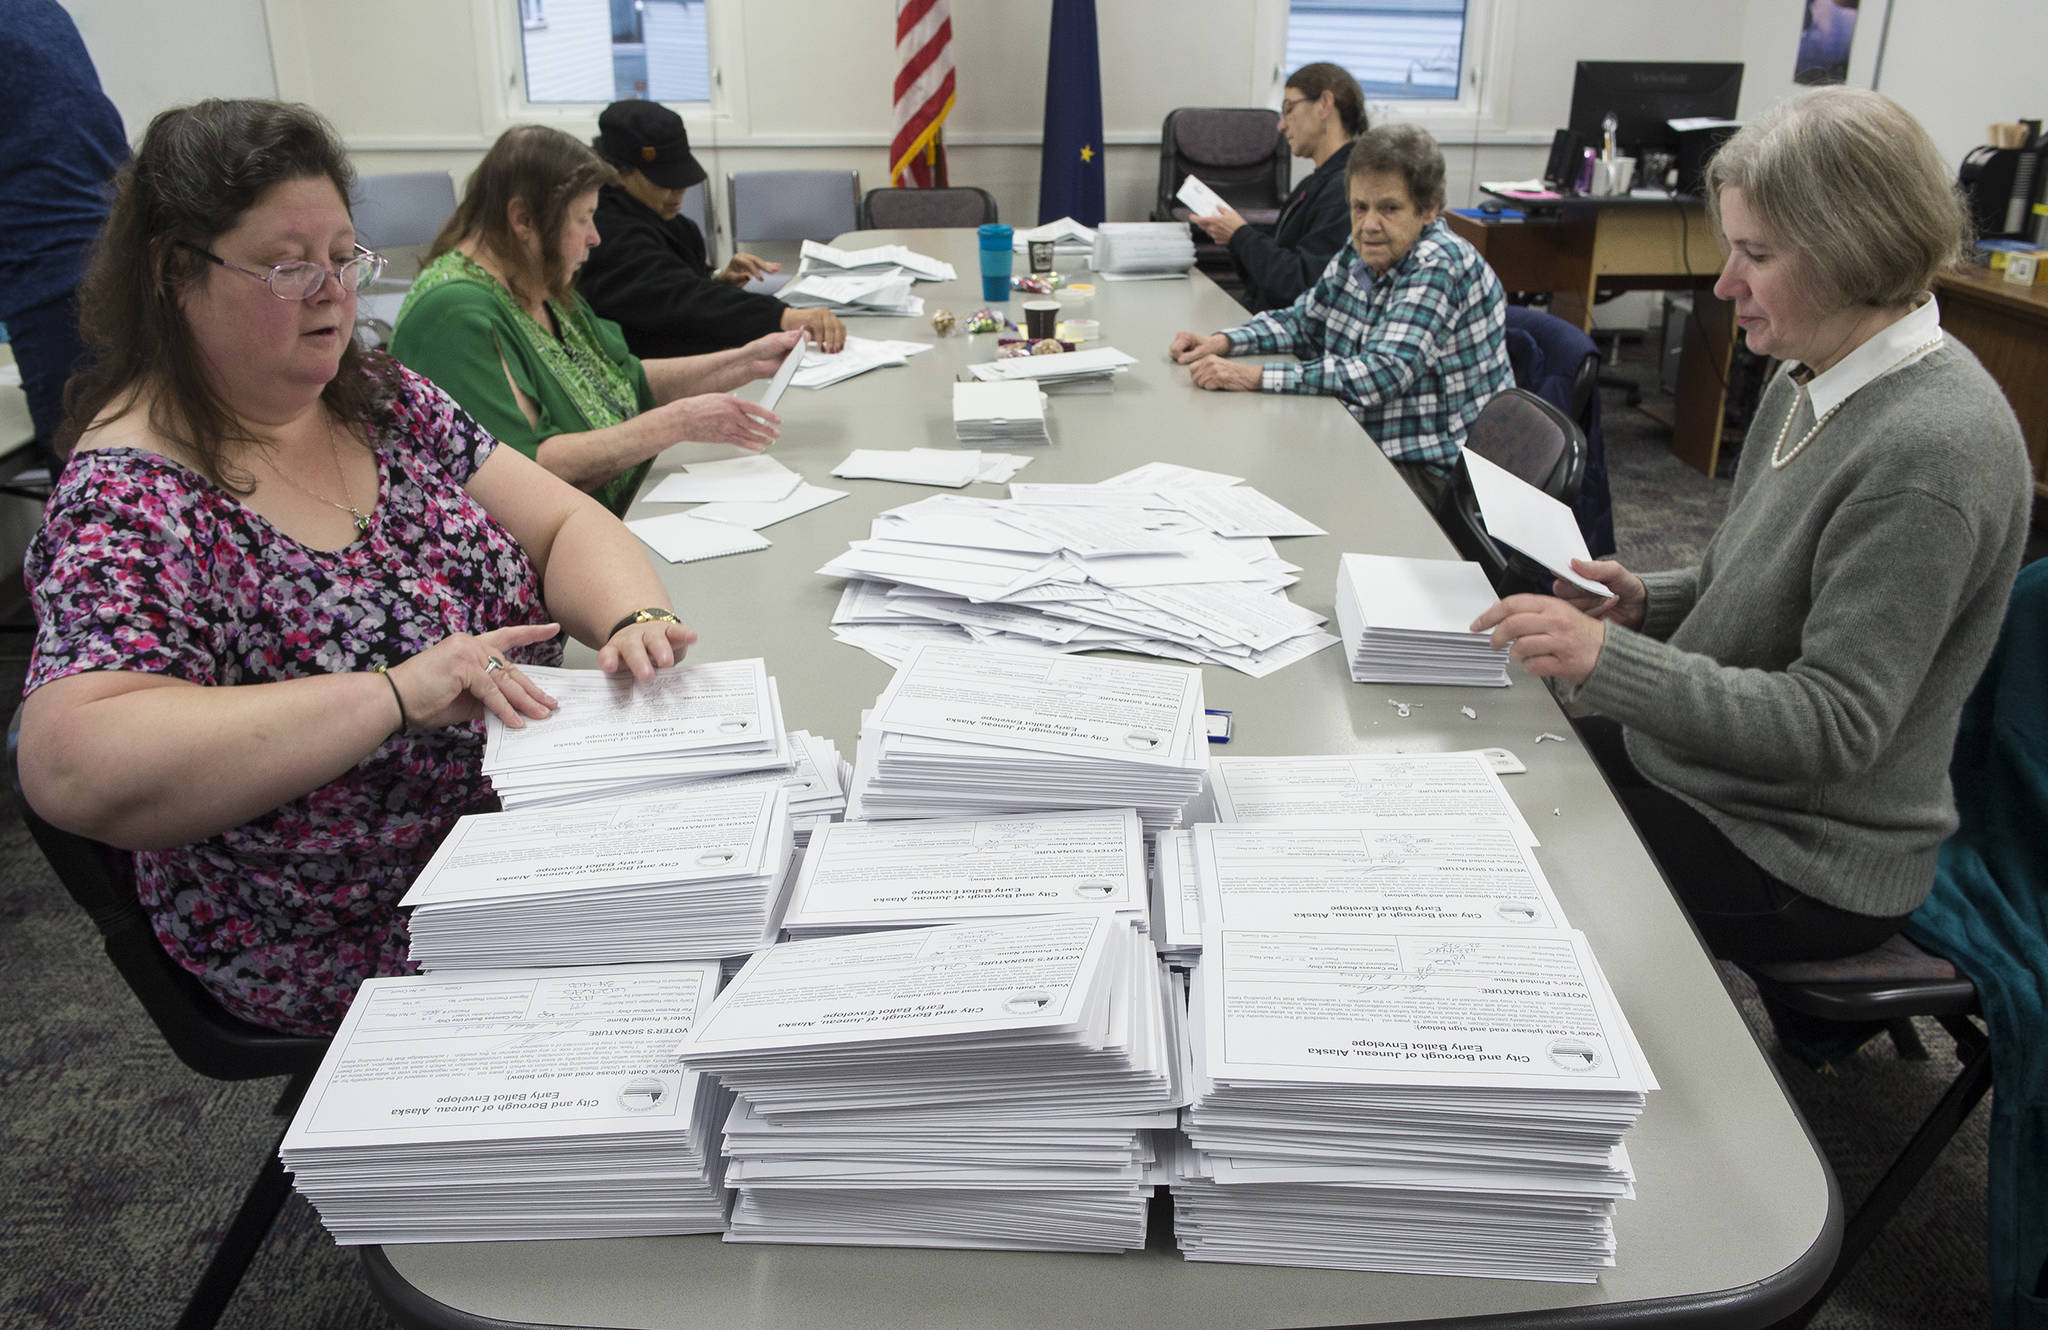 Members of the Absentee Questioned Ballot Review Board open ballots before counting at the City Hall on Friday, Oct. 6, 2017. (Michael Penn | Juneau Empire)